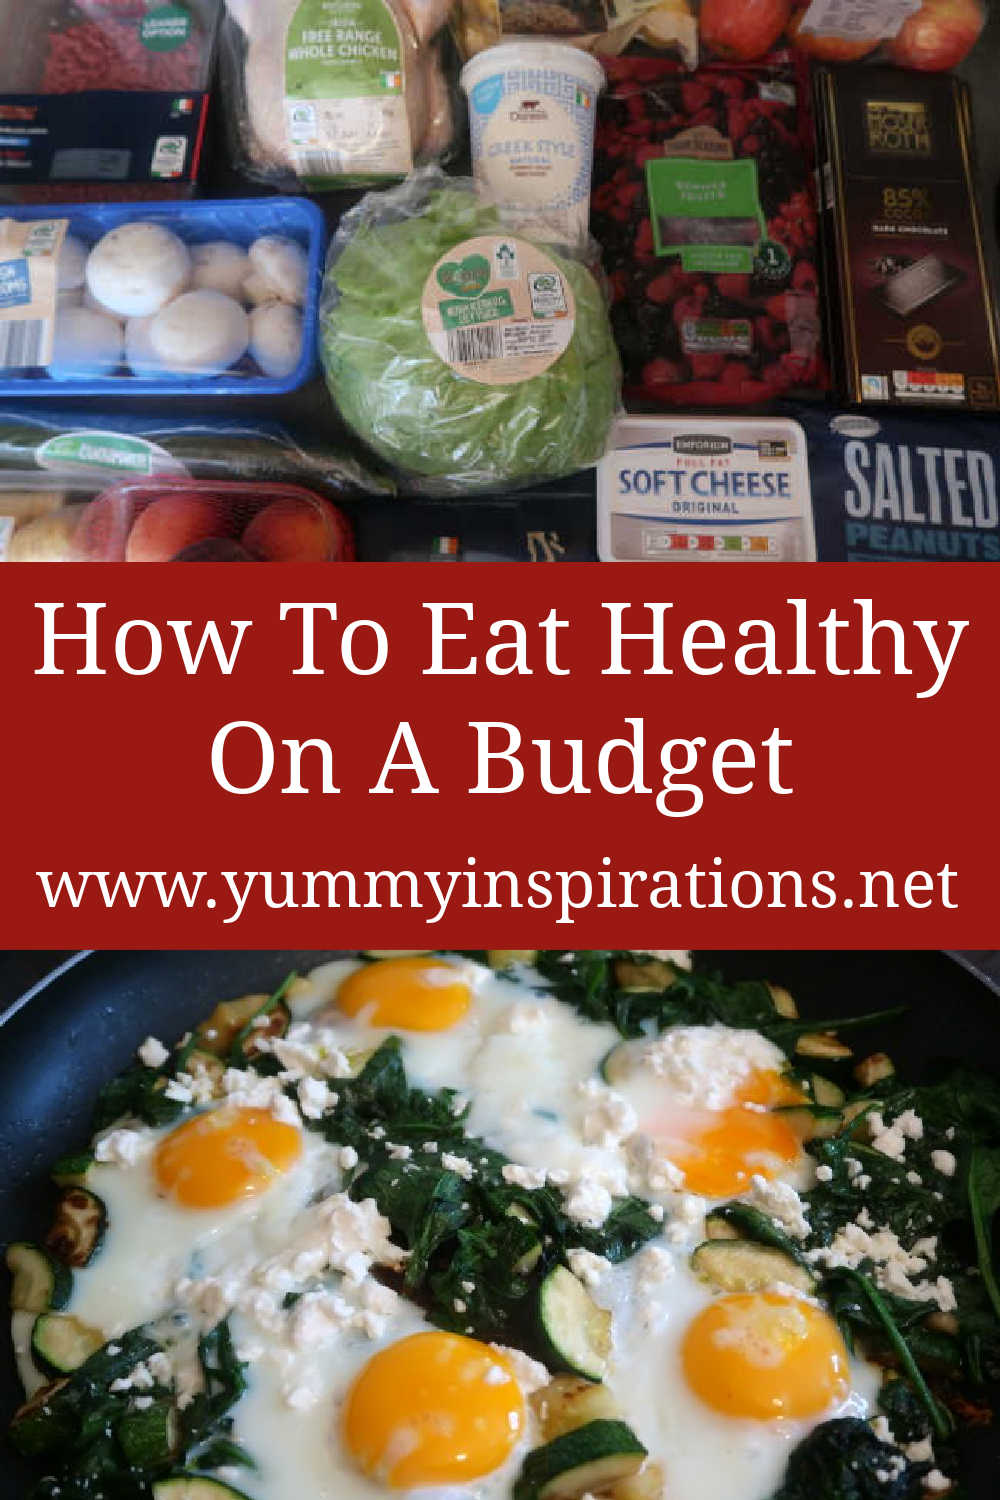 How To Eat Healthy On A Budget - healthy eating tips, easy recipe ideas and ways to save money when you're on a tight budget.